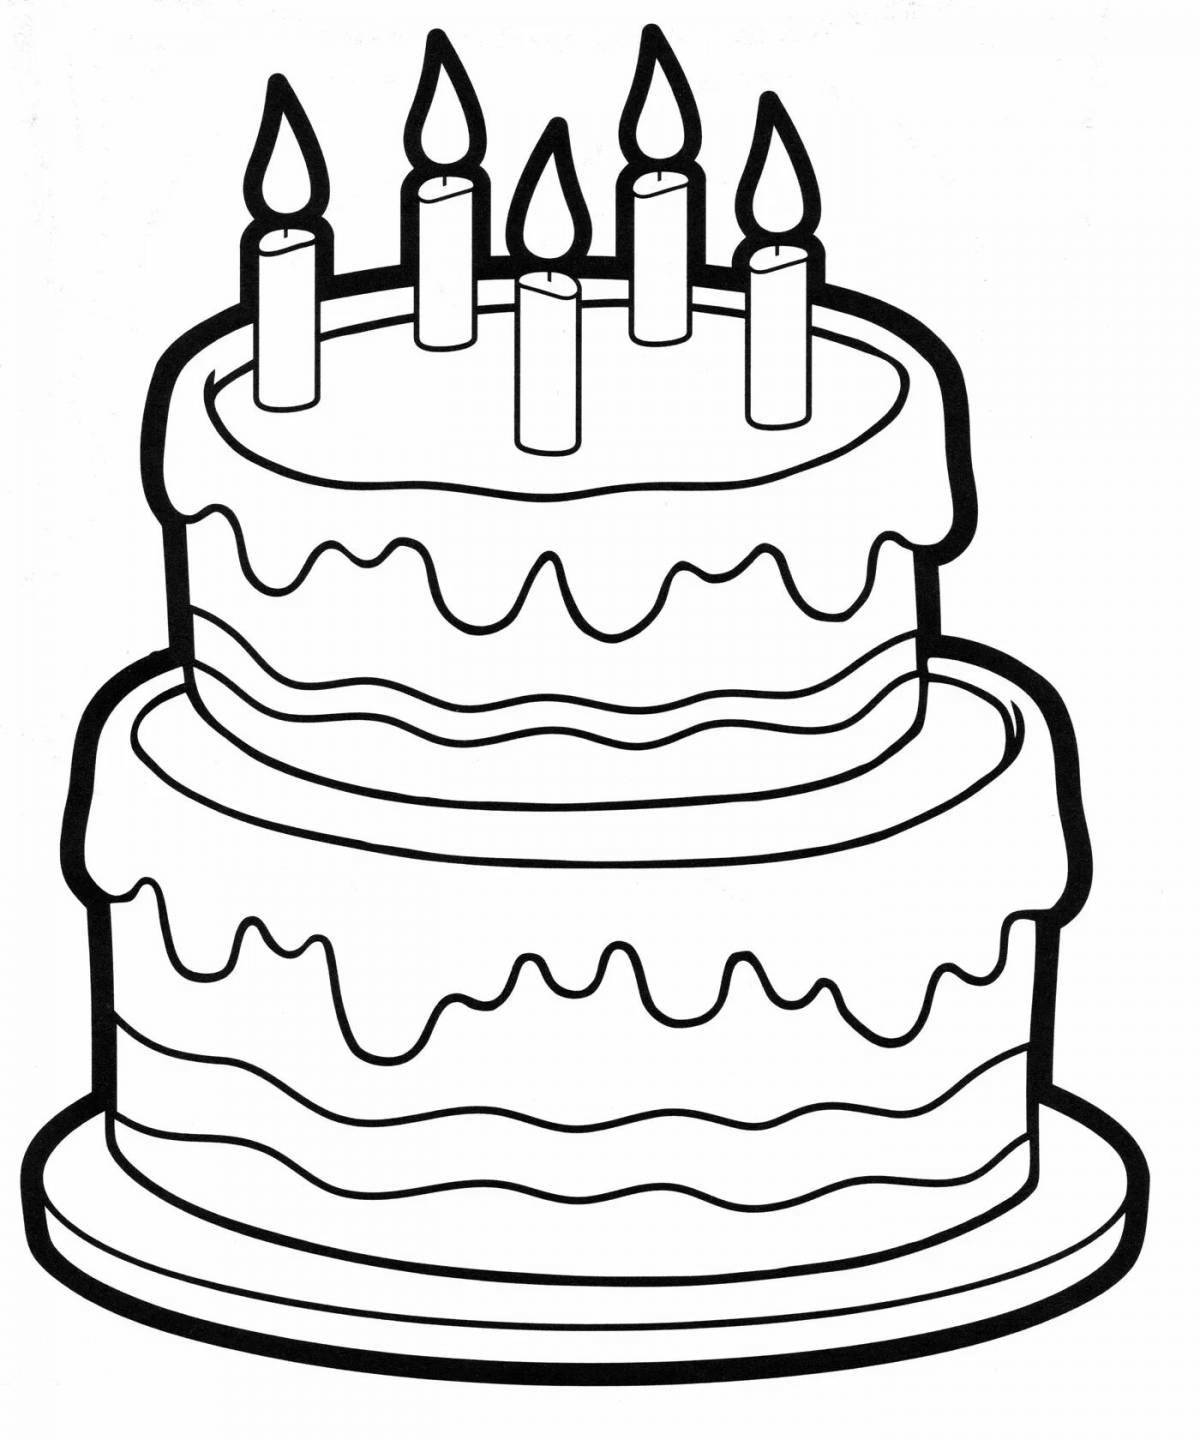 Colorful puffy birthday cake coloring book